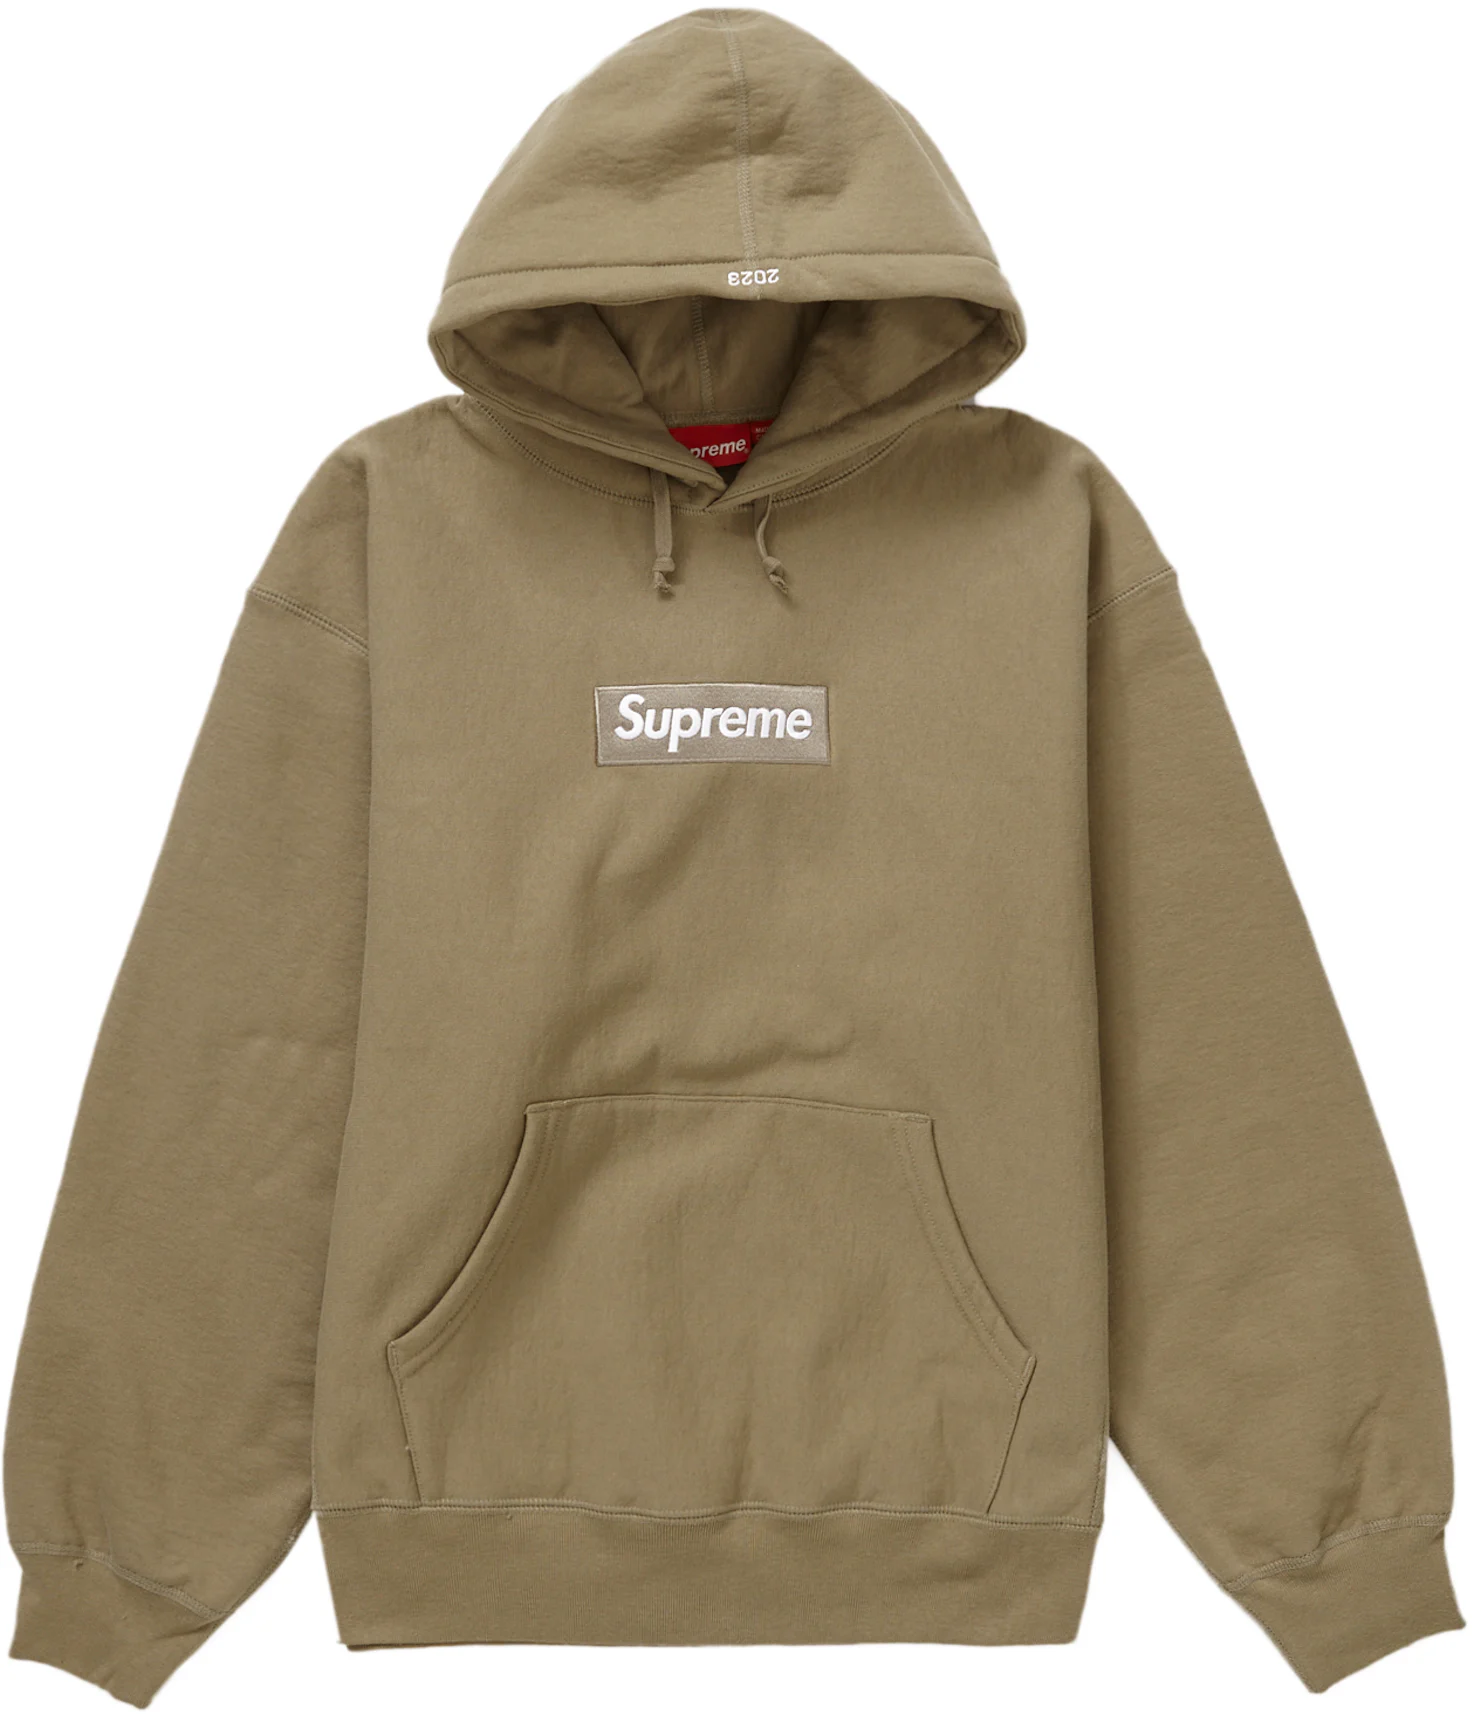 Supreme Most Expensive Hoodie | visitchile.cl